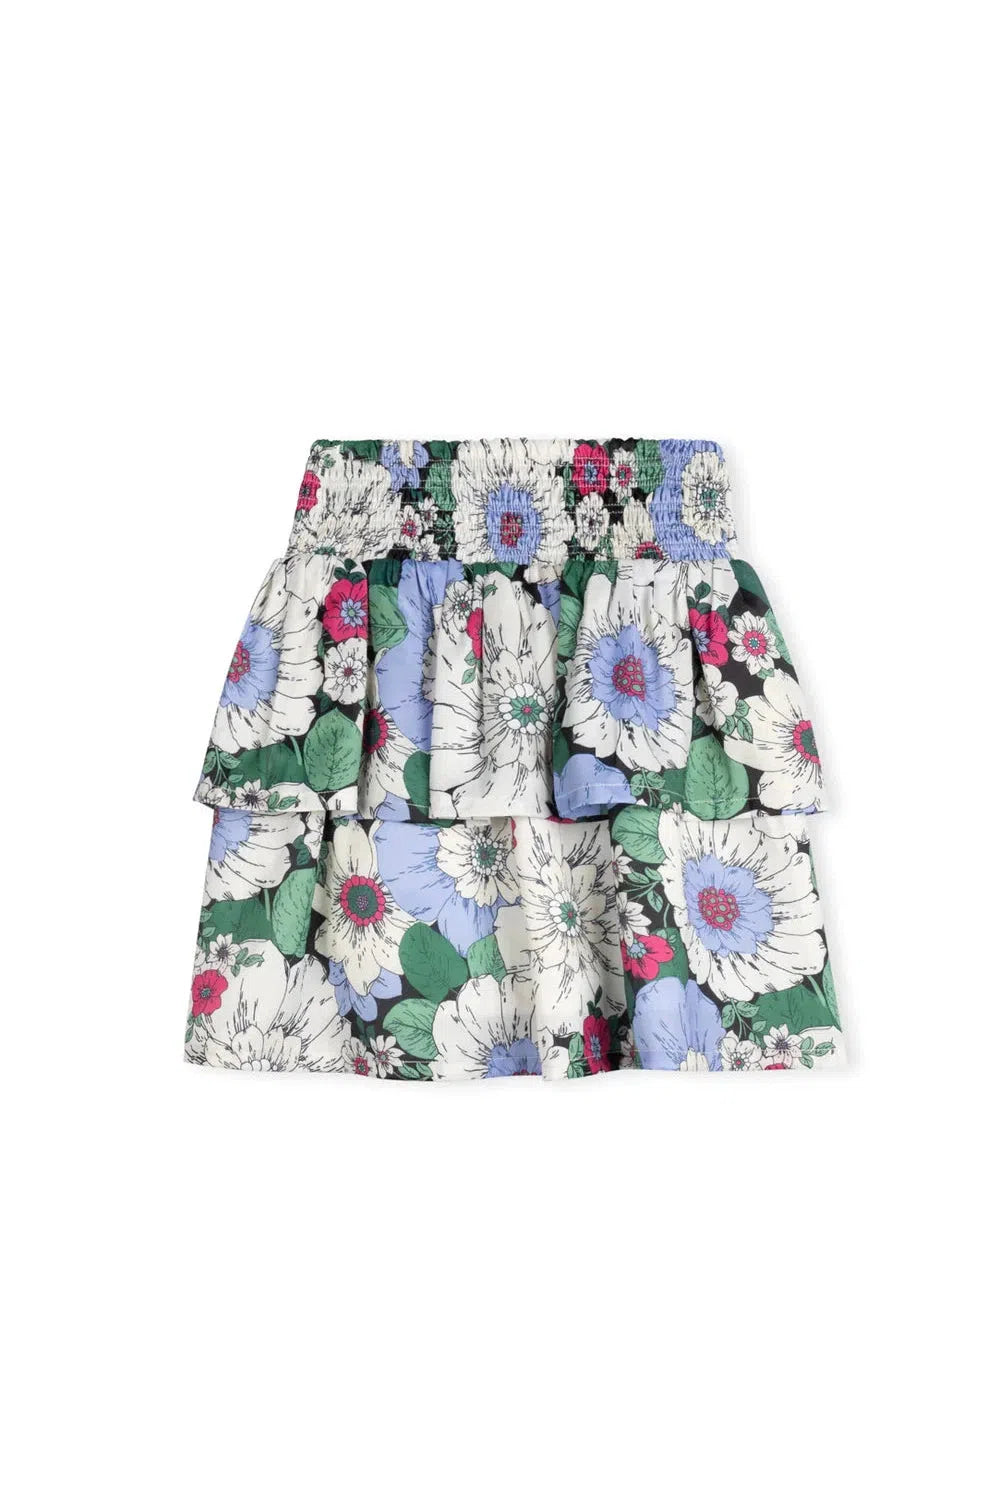 BRILL - FLORAL PRINTED DOUBLE LAYERED SKIRT חצאית